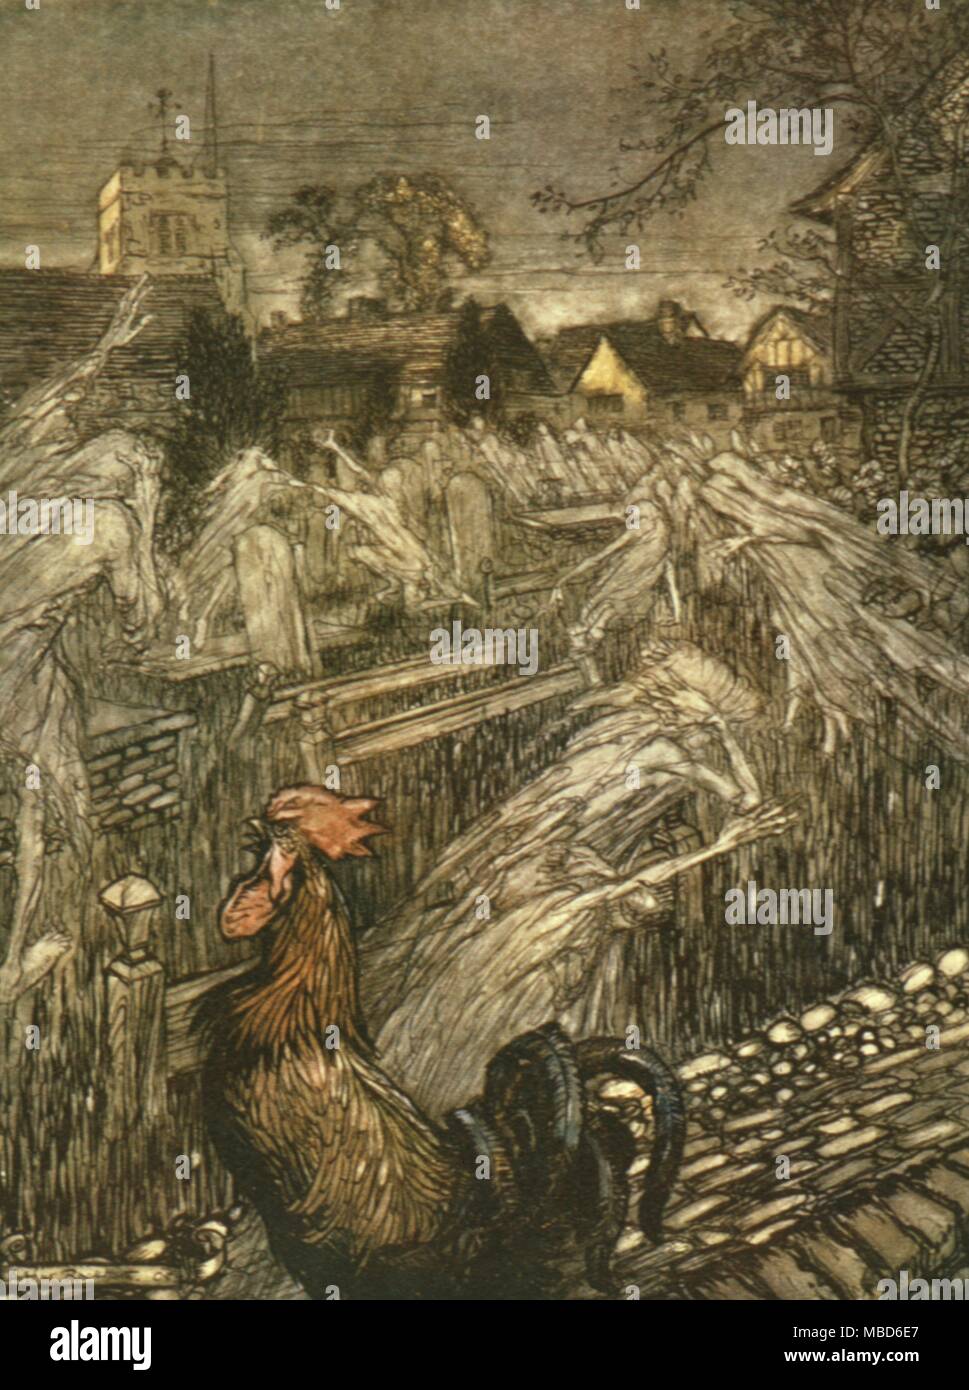 Ghosts, wandering here and there, troop home to churchyards. Illustration by Arthur Rackham for the 1908 edition of A Midsummer Night 's Dream, by Shakespeare . Stock Photo